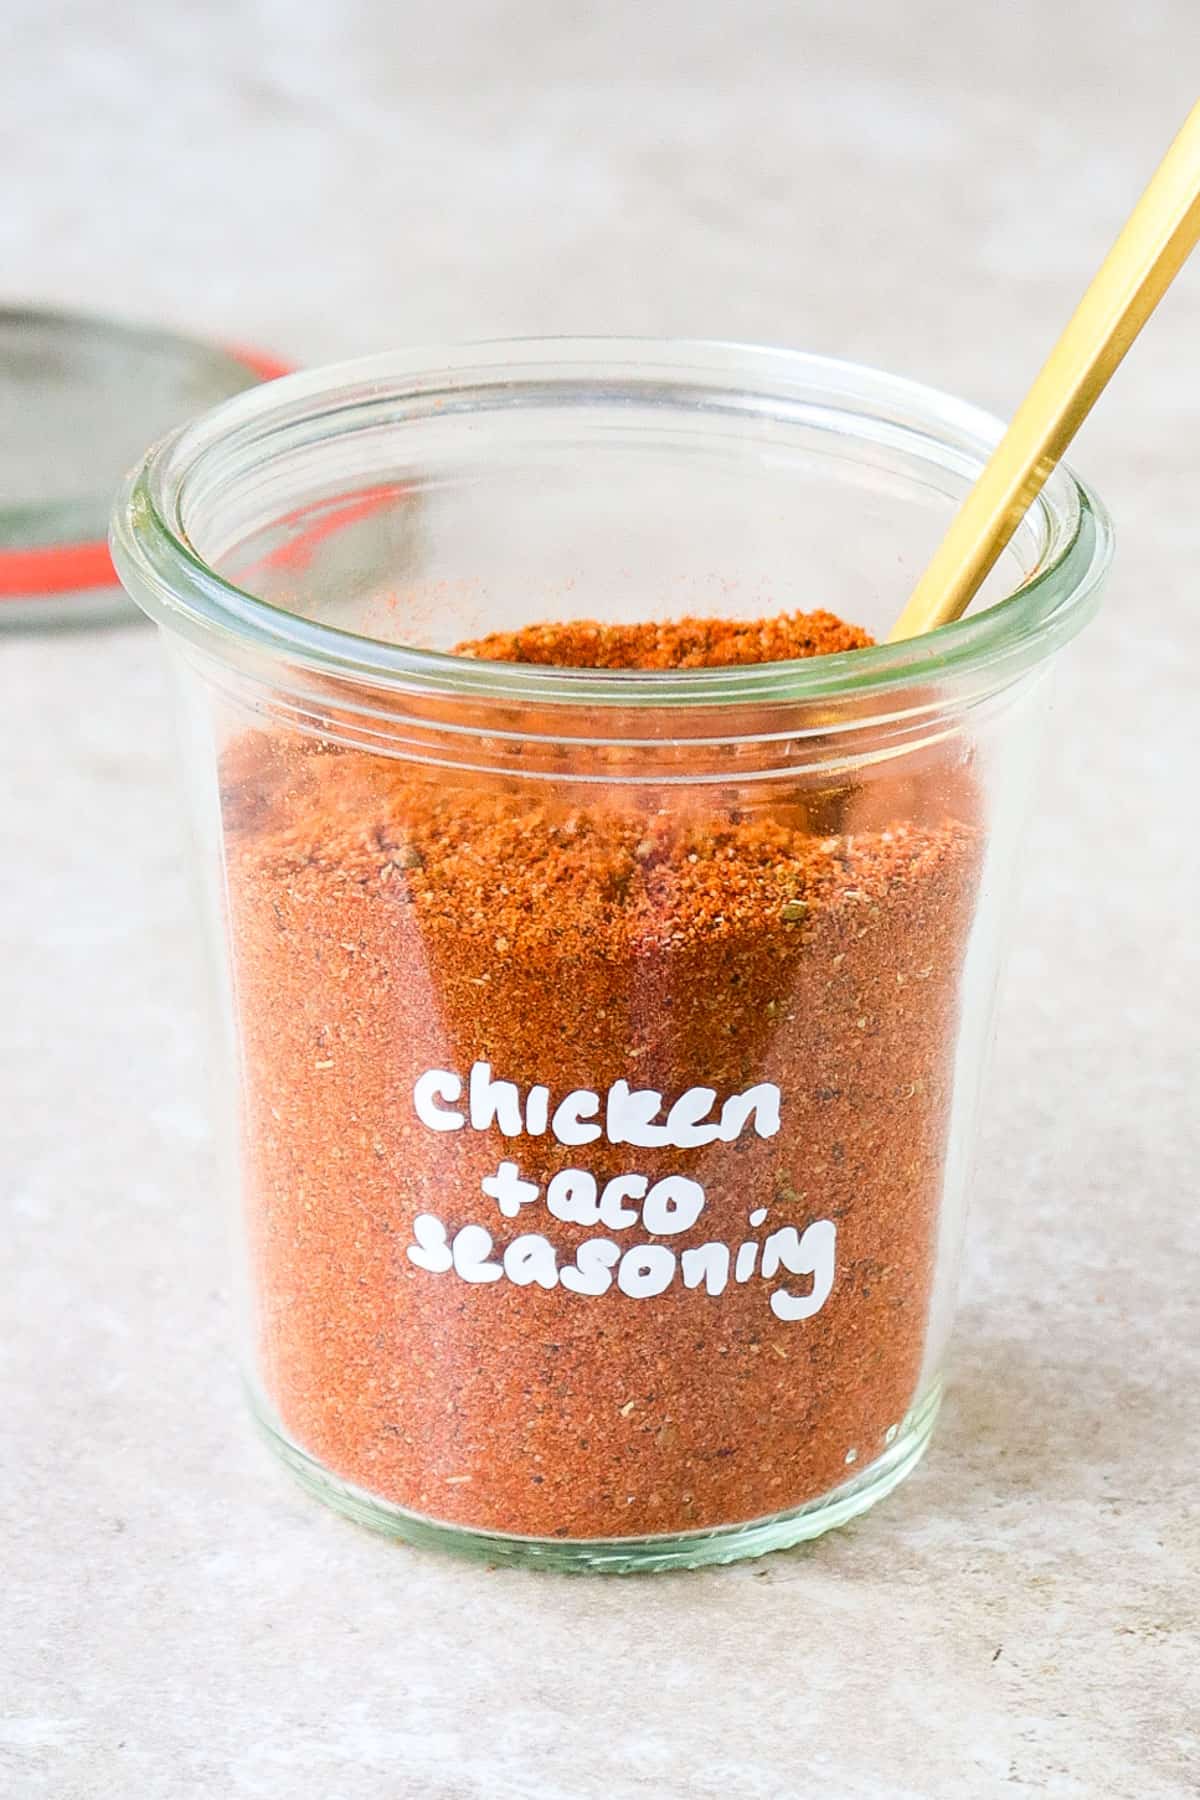 Taco spices in a jar.